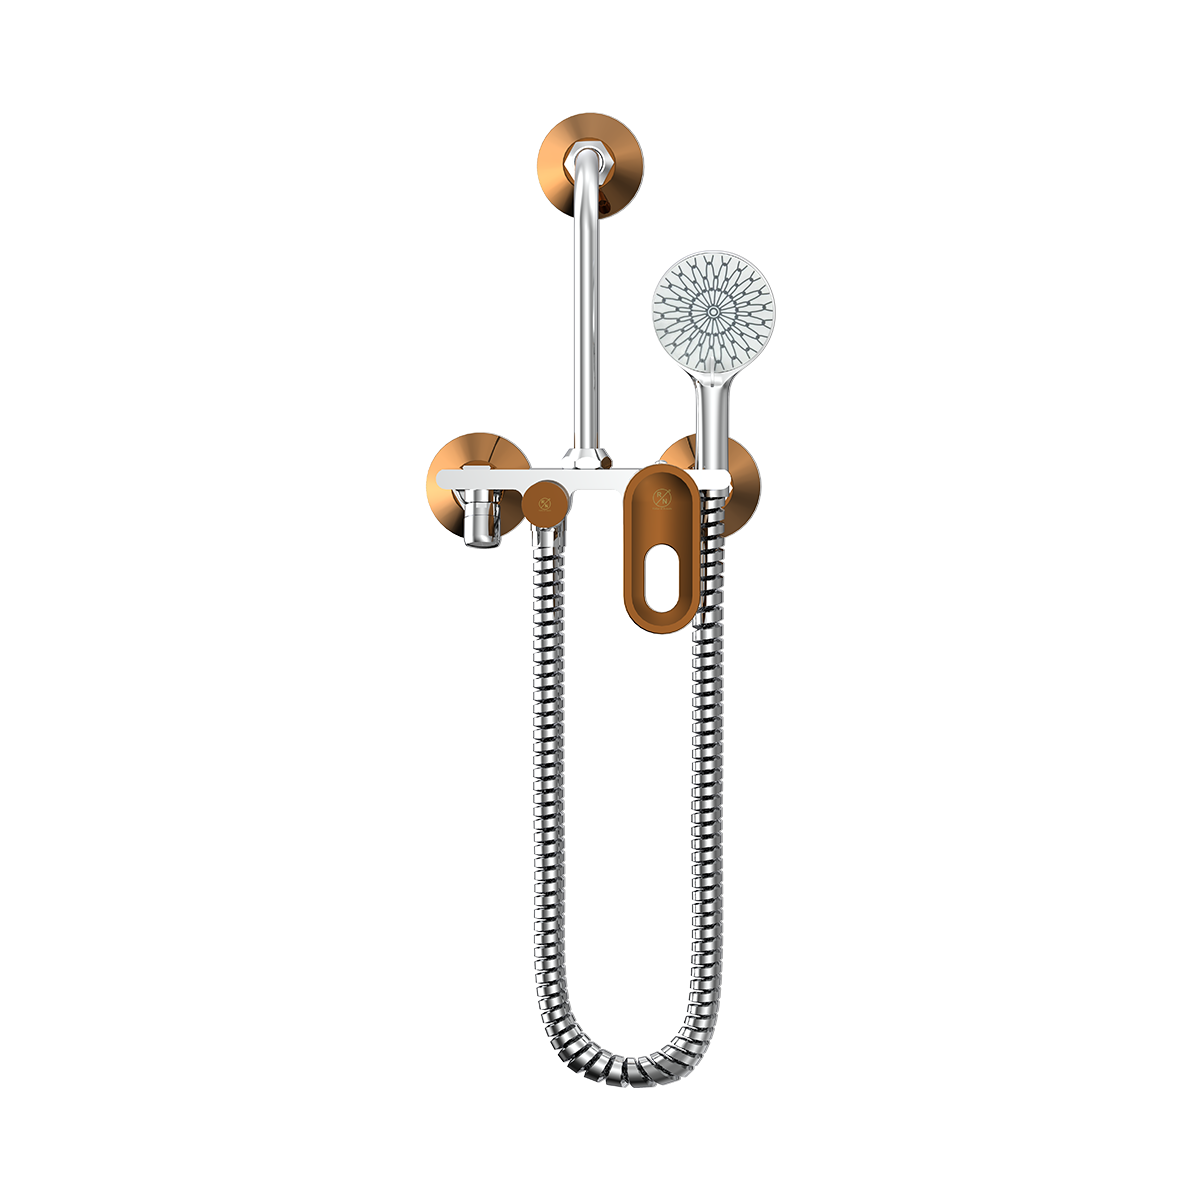 Single Lever Wall Mixer With Provision For Both Overhead & Hand Shower With L- Bend